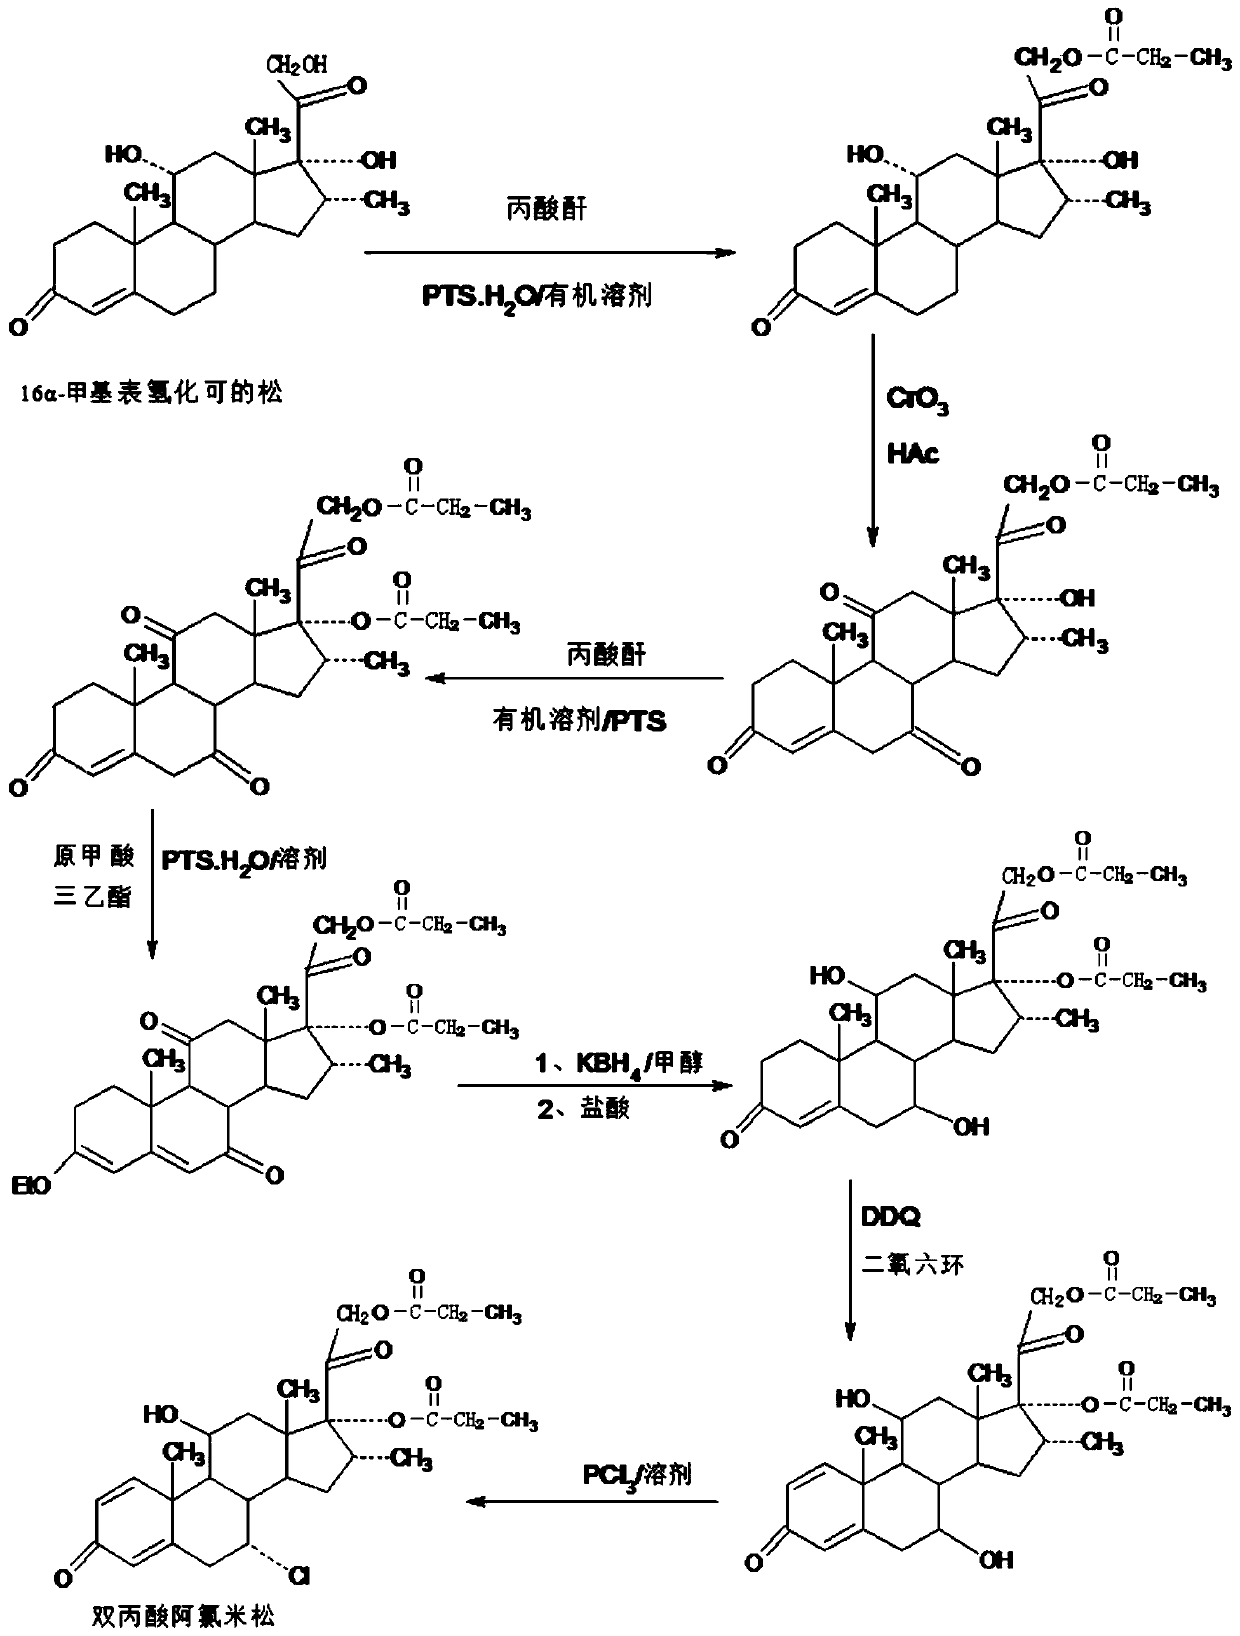 A kind of method for preparing the etherified intermediate used for aclomethasone dipropionate